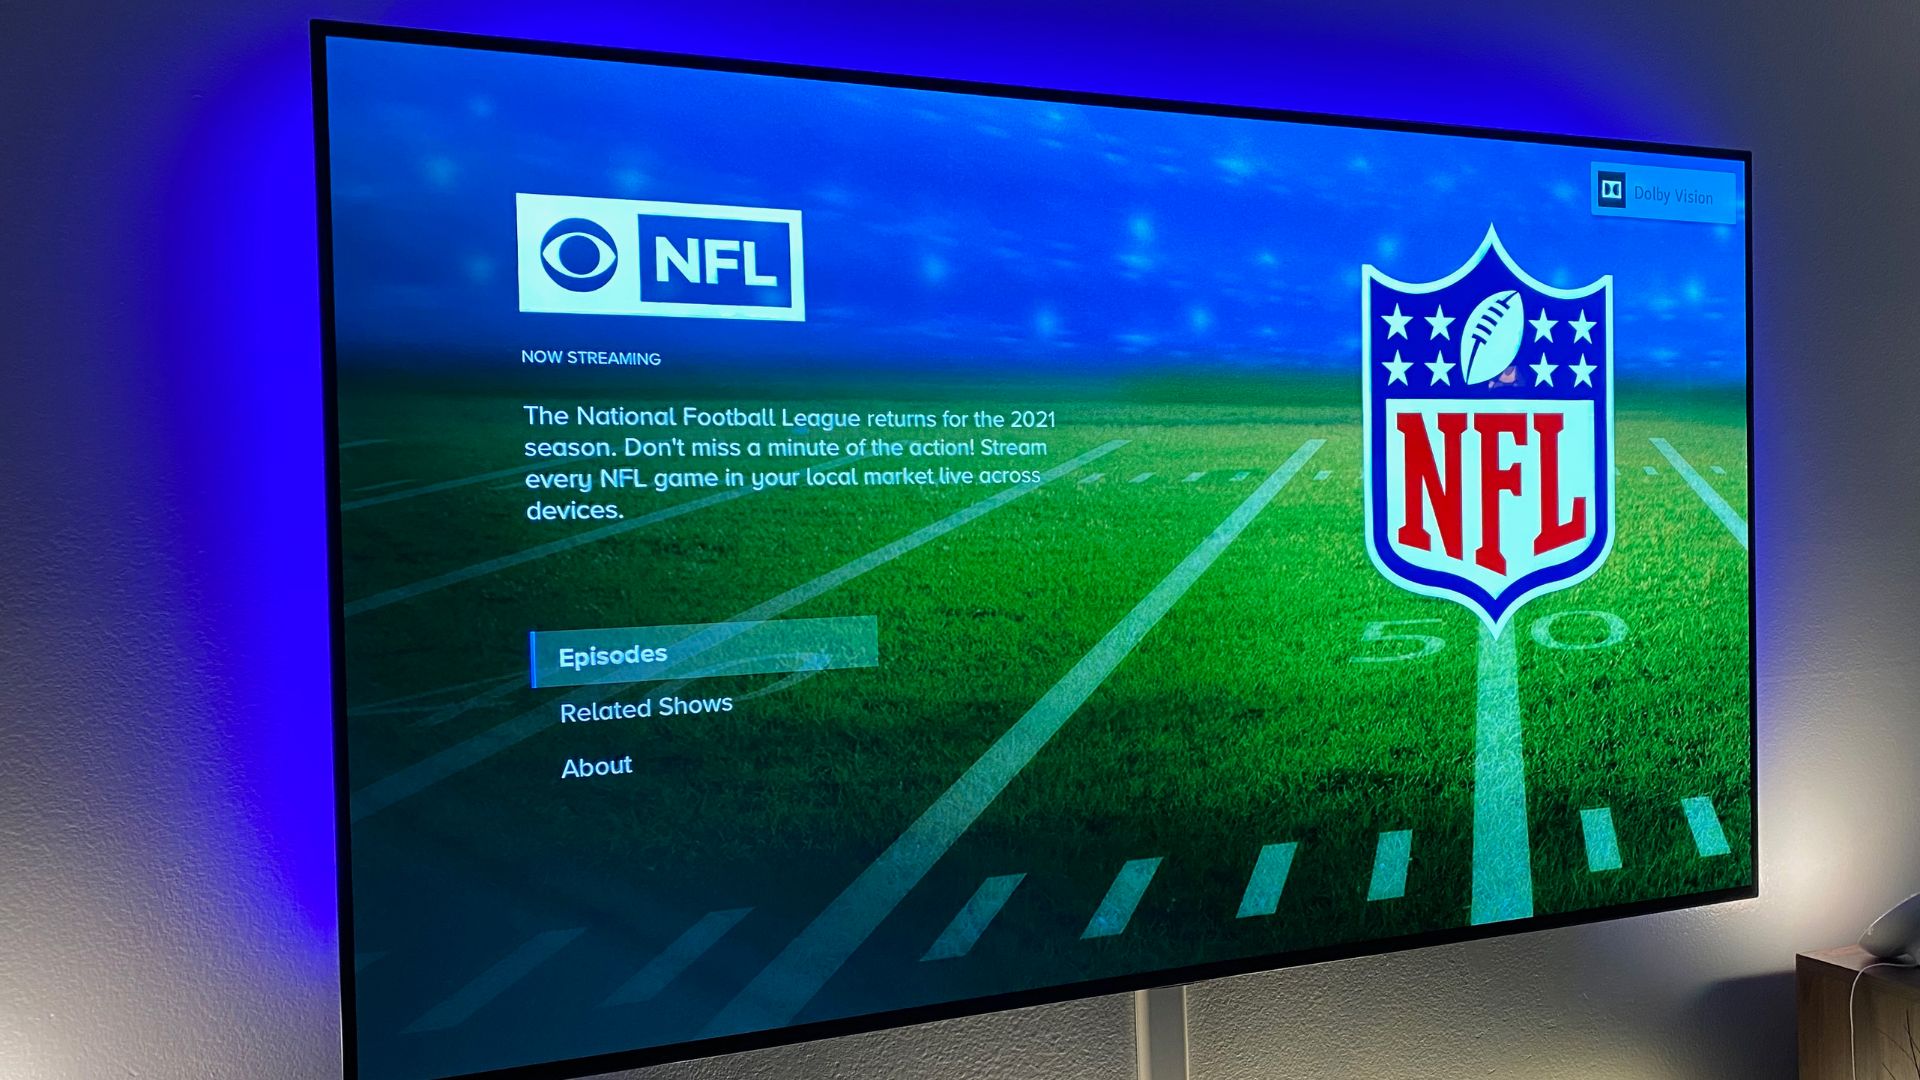 How To Watch NFL On Smart TV